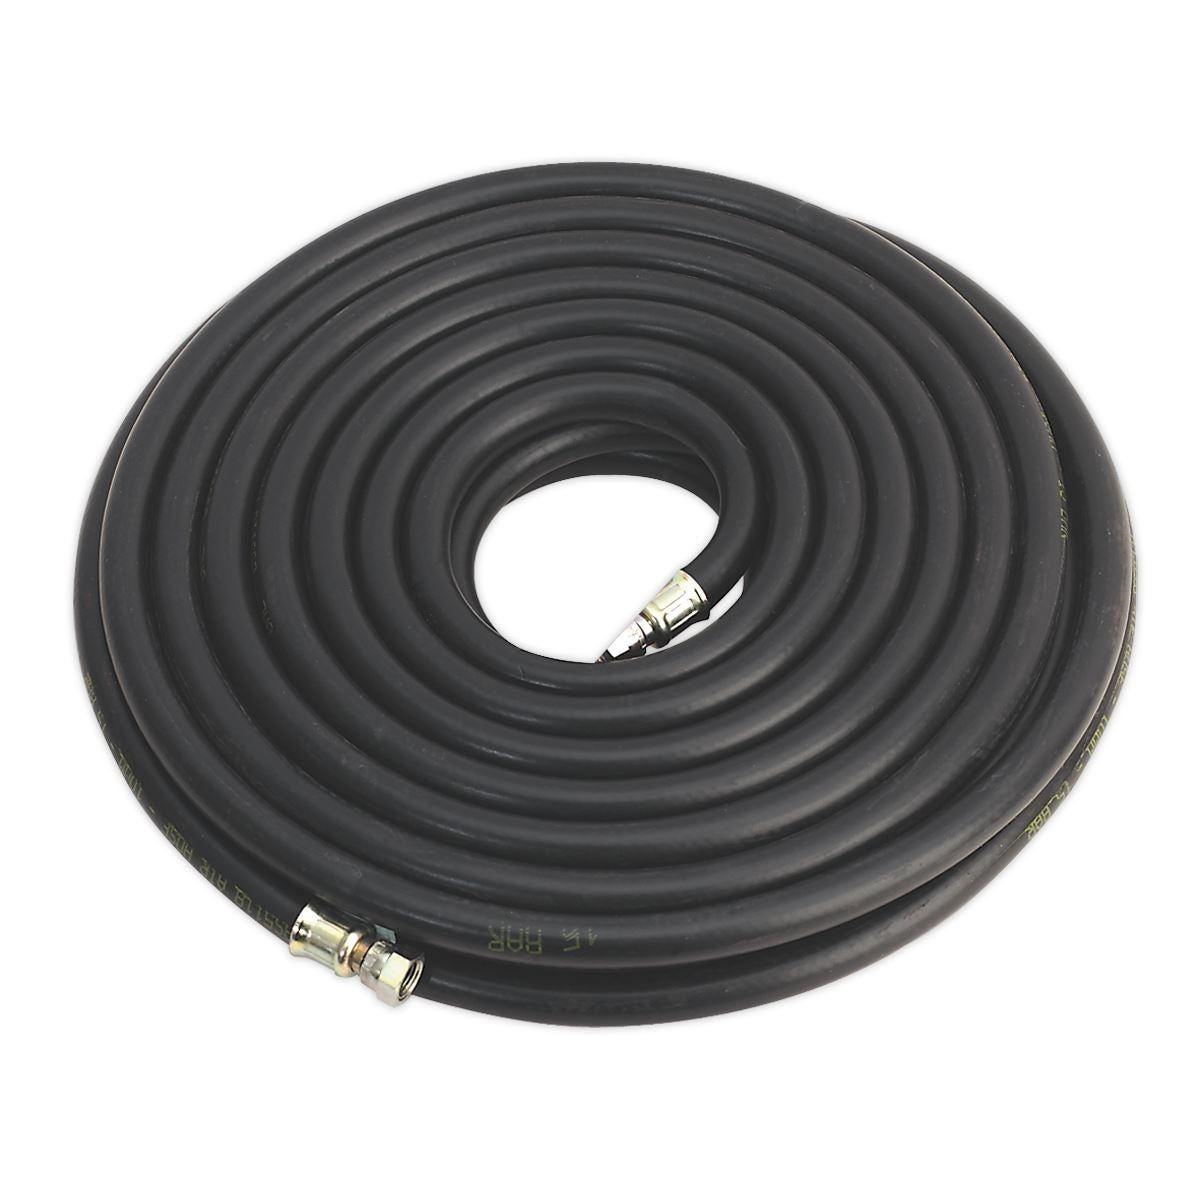 Sealey Air Hose 15m x Ø10mm with 1/4"BSP Unions Heavy-Duty